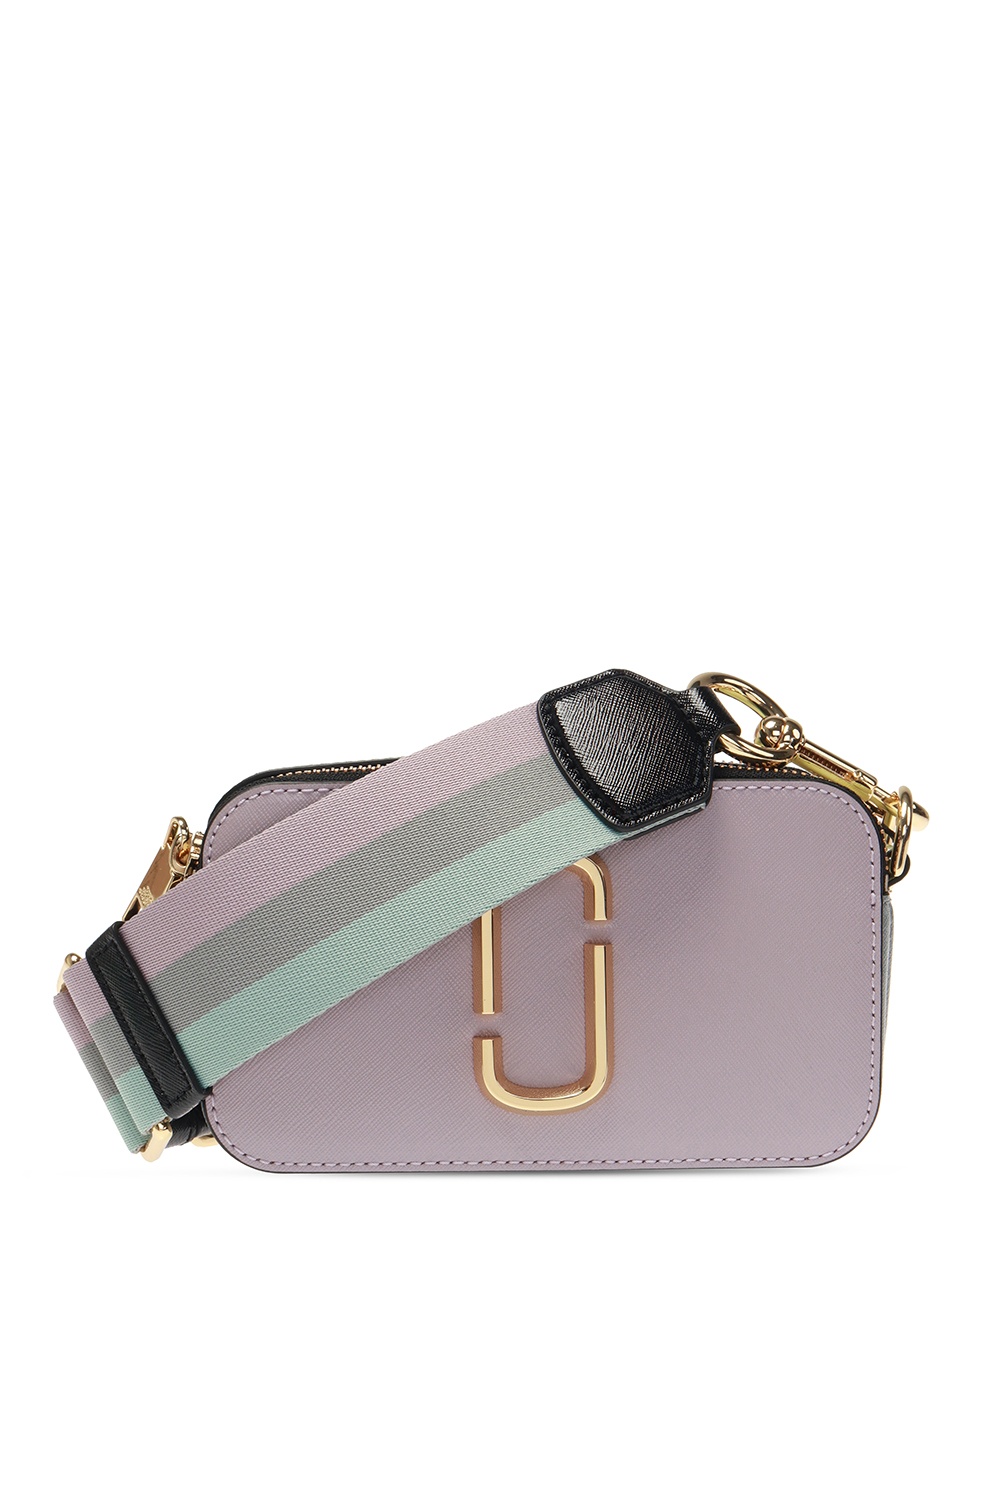 [Marc Jacobs] The snapshot camera cross bag M0012007 Free Gifts